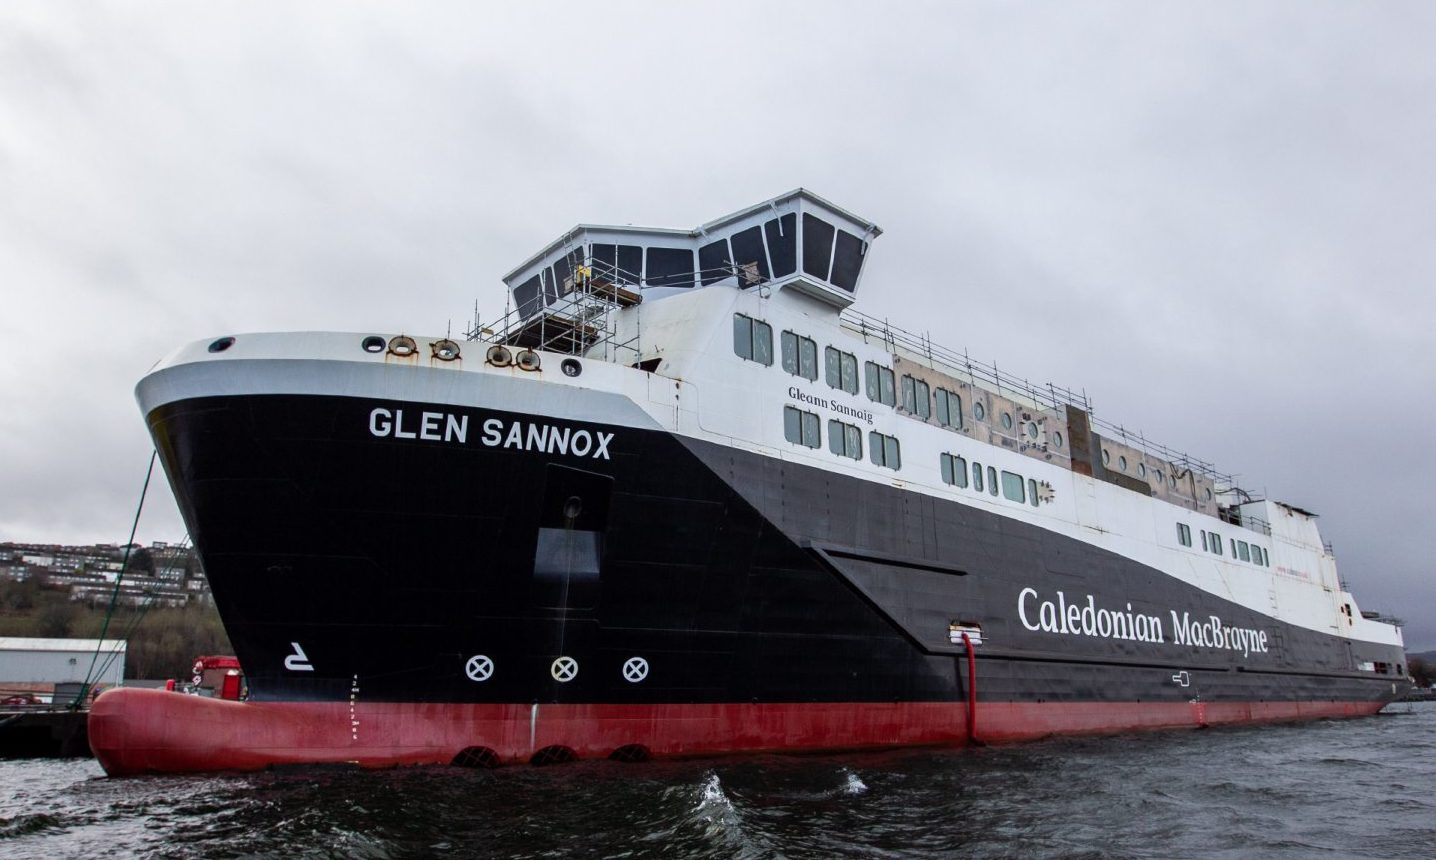 One of the two Calmac ferries being built at Ferguson Marine in Port Glasgow.